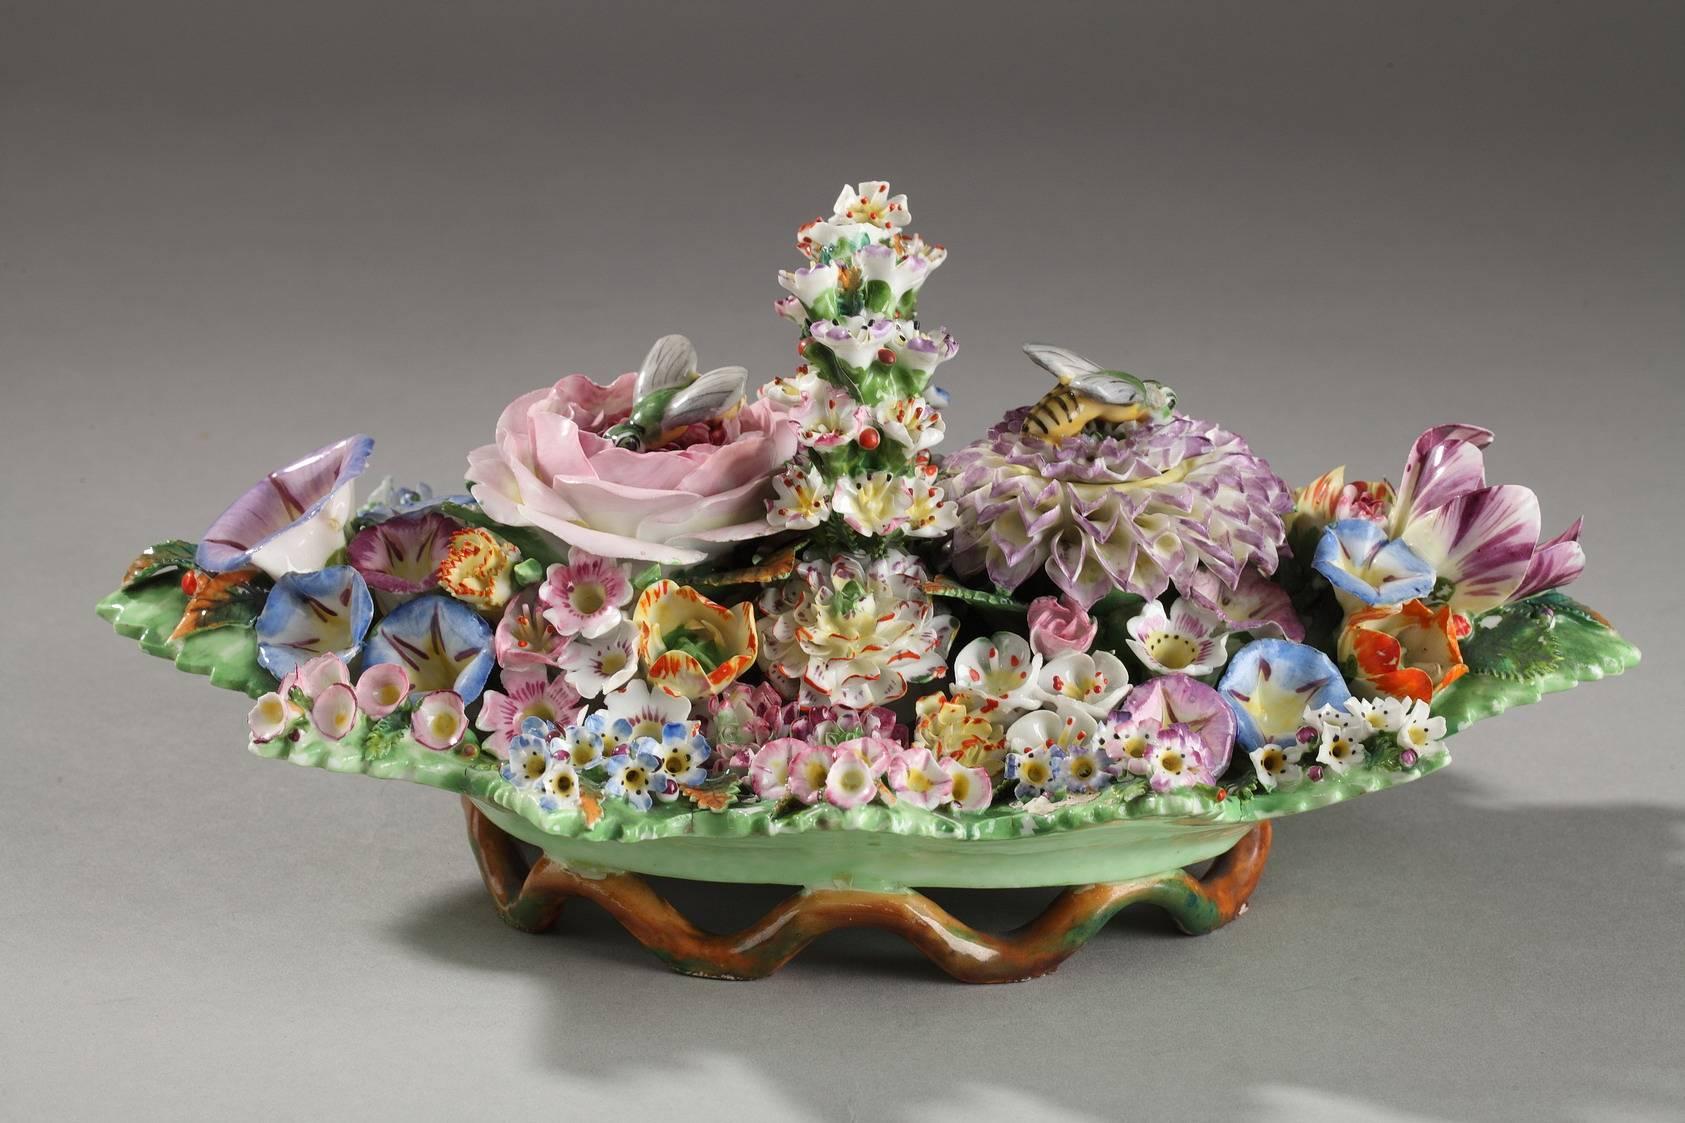 Multicolored porcelain inkwell in the shape of a basket of flowers. It is covered in a variety of textured flowers: Violets, tulips, chrysanthemum, roses, and several varieties of petunias. This piece is very representative of the original and